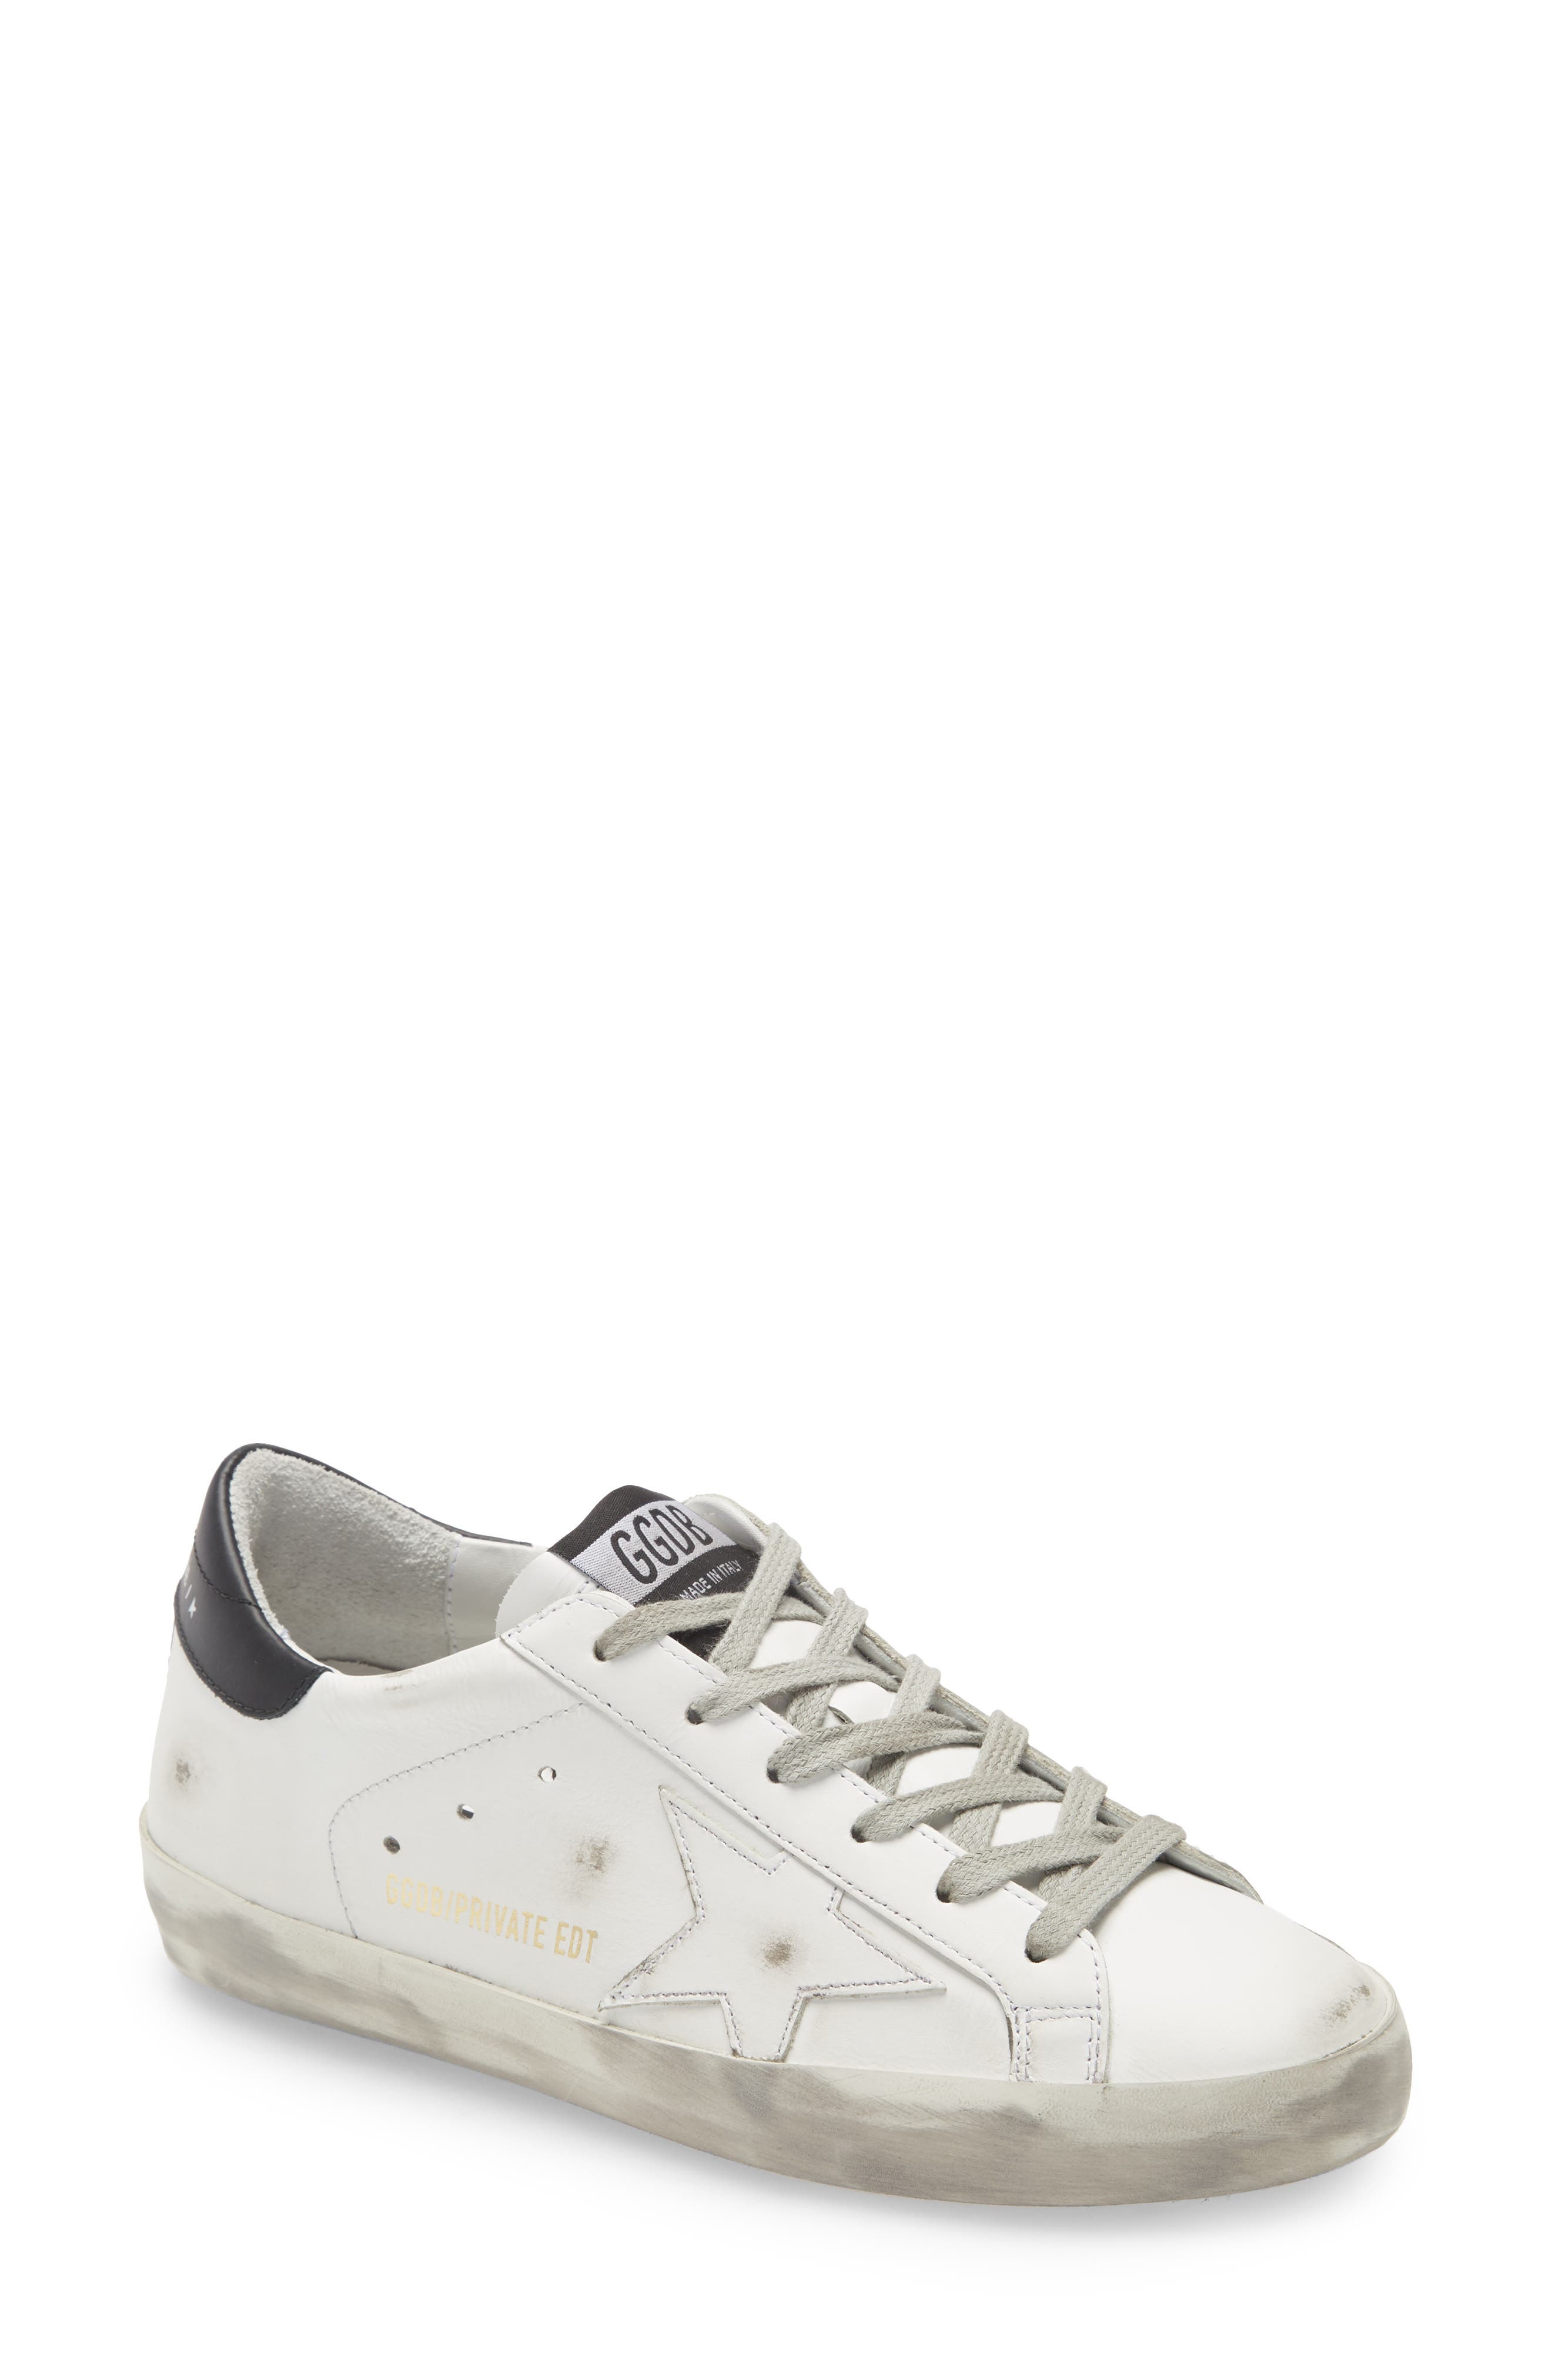 nordstrom womens tennis shoes